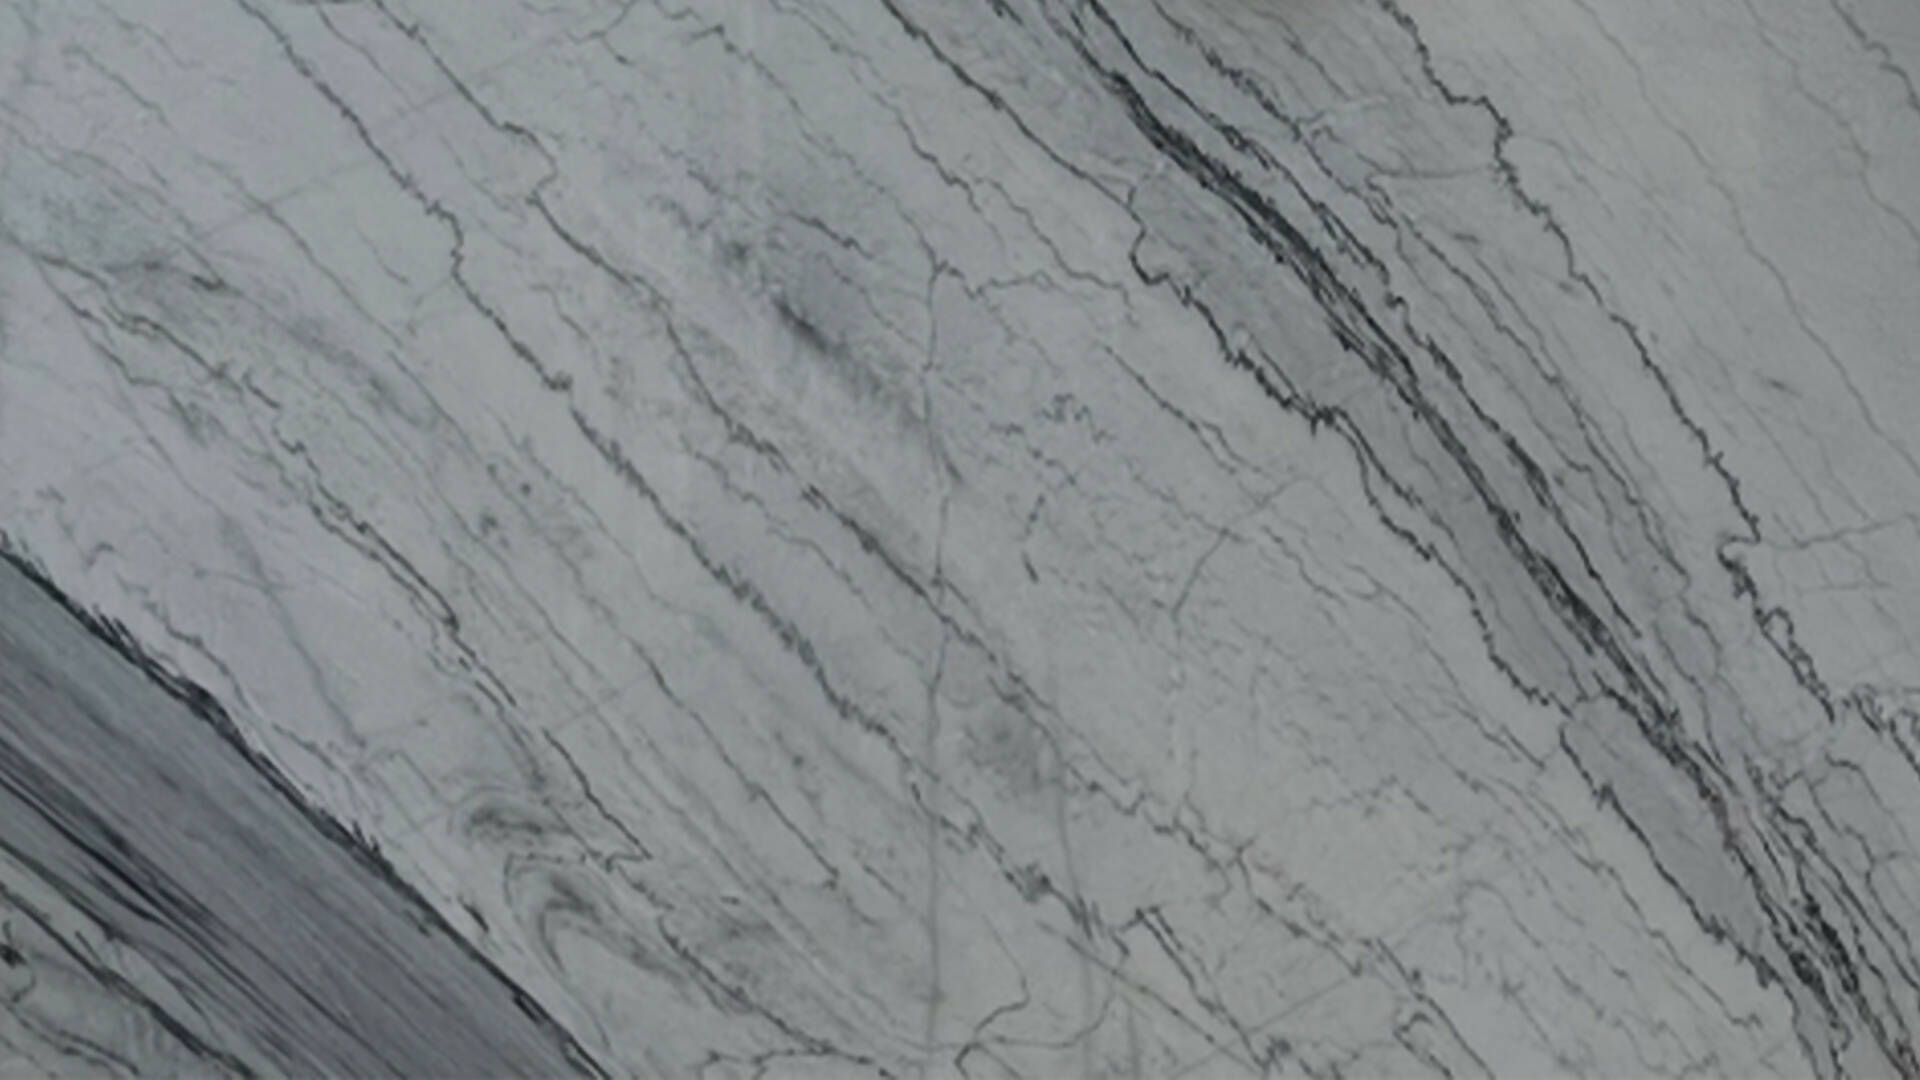 BIANCO SIMONO BOOKMATCH MARBLE,Marble,Develli,www.work-tops.com